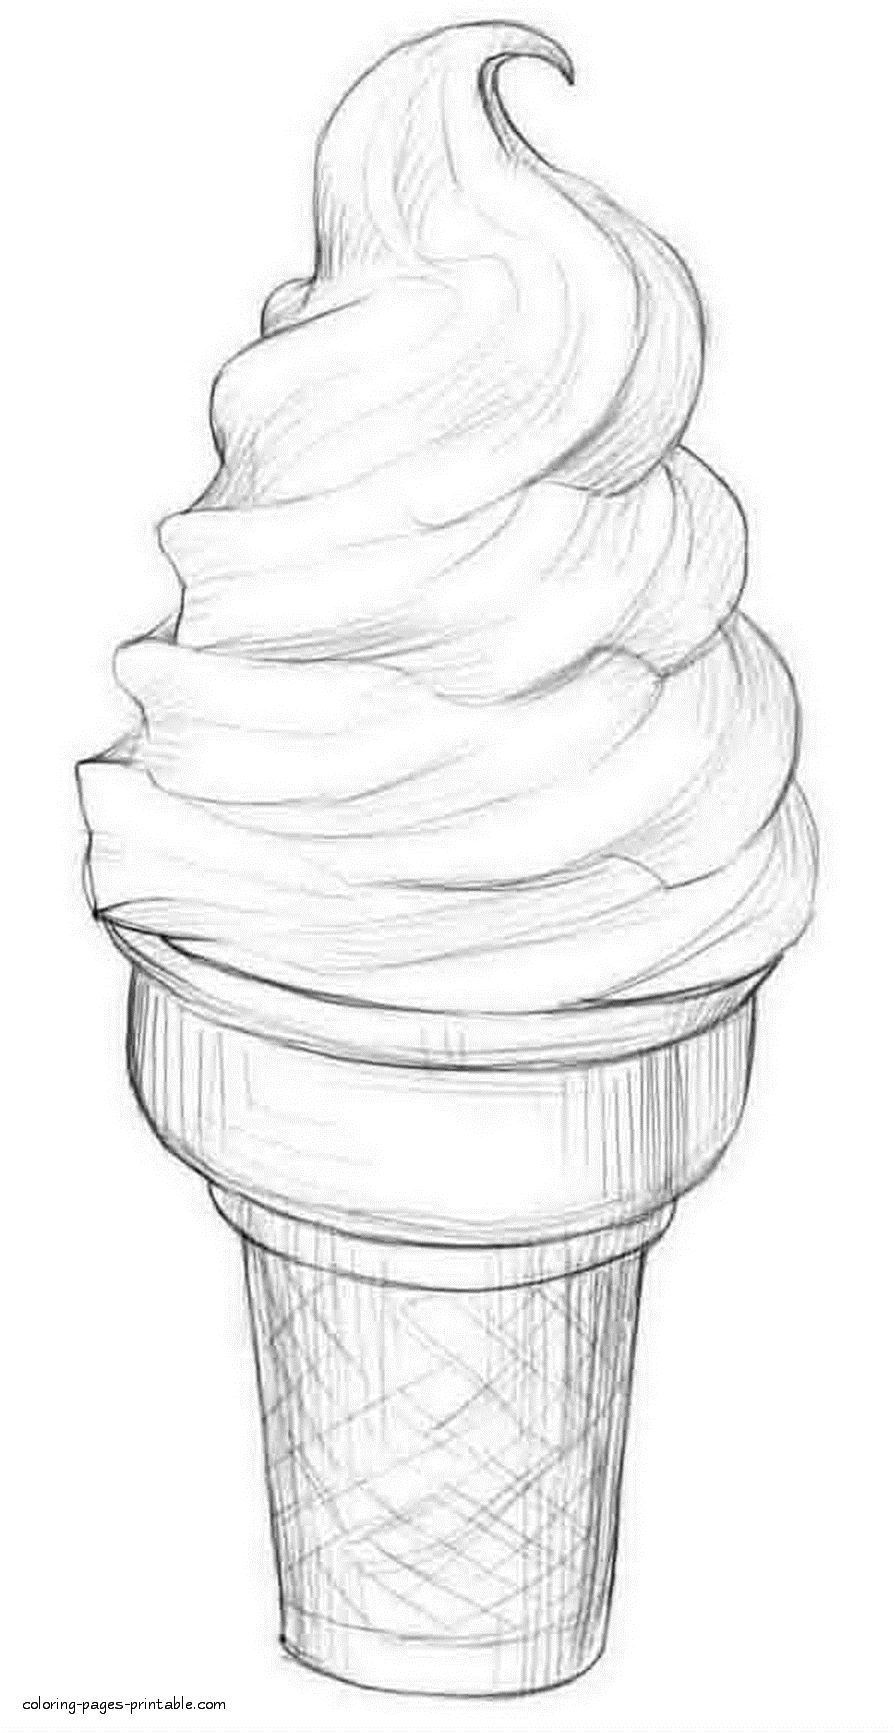 Ice cream cone to print and color || COLORING-PAGES-PRINTABLE.COM